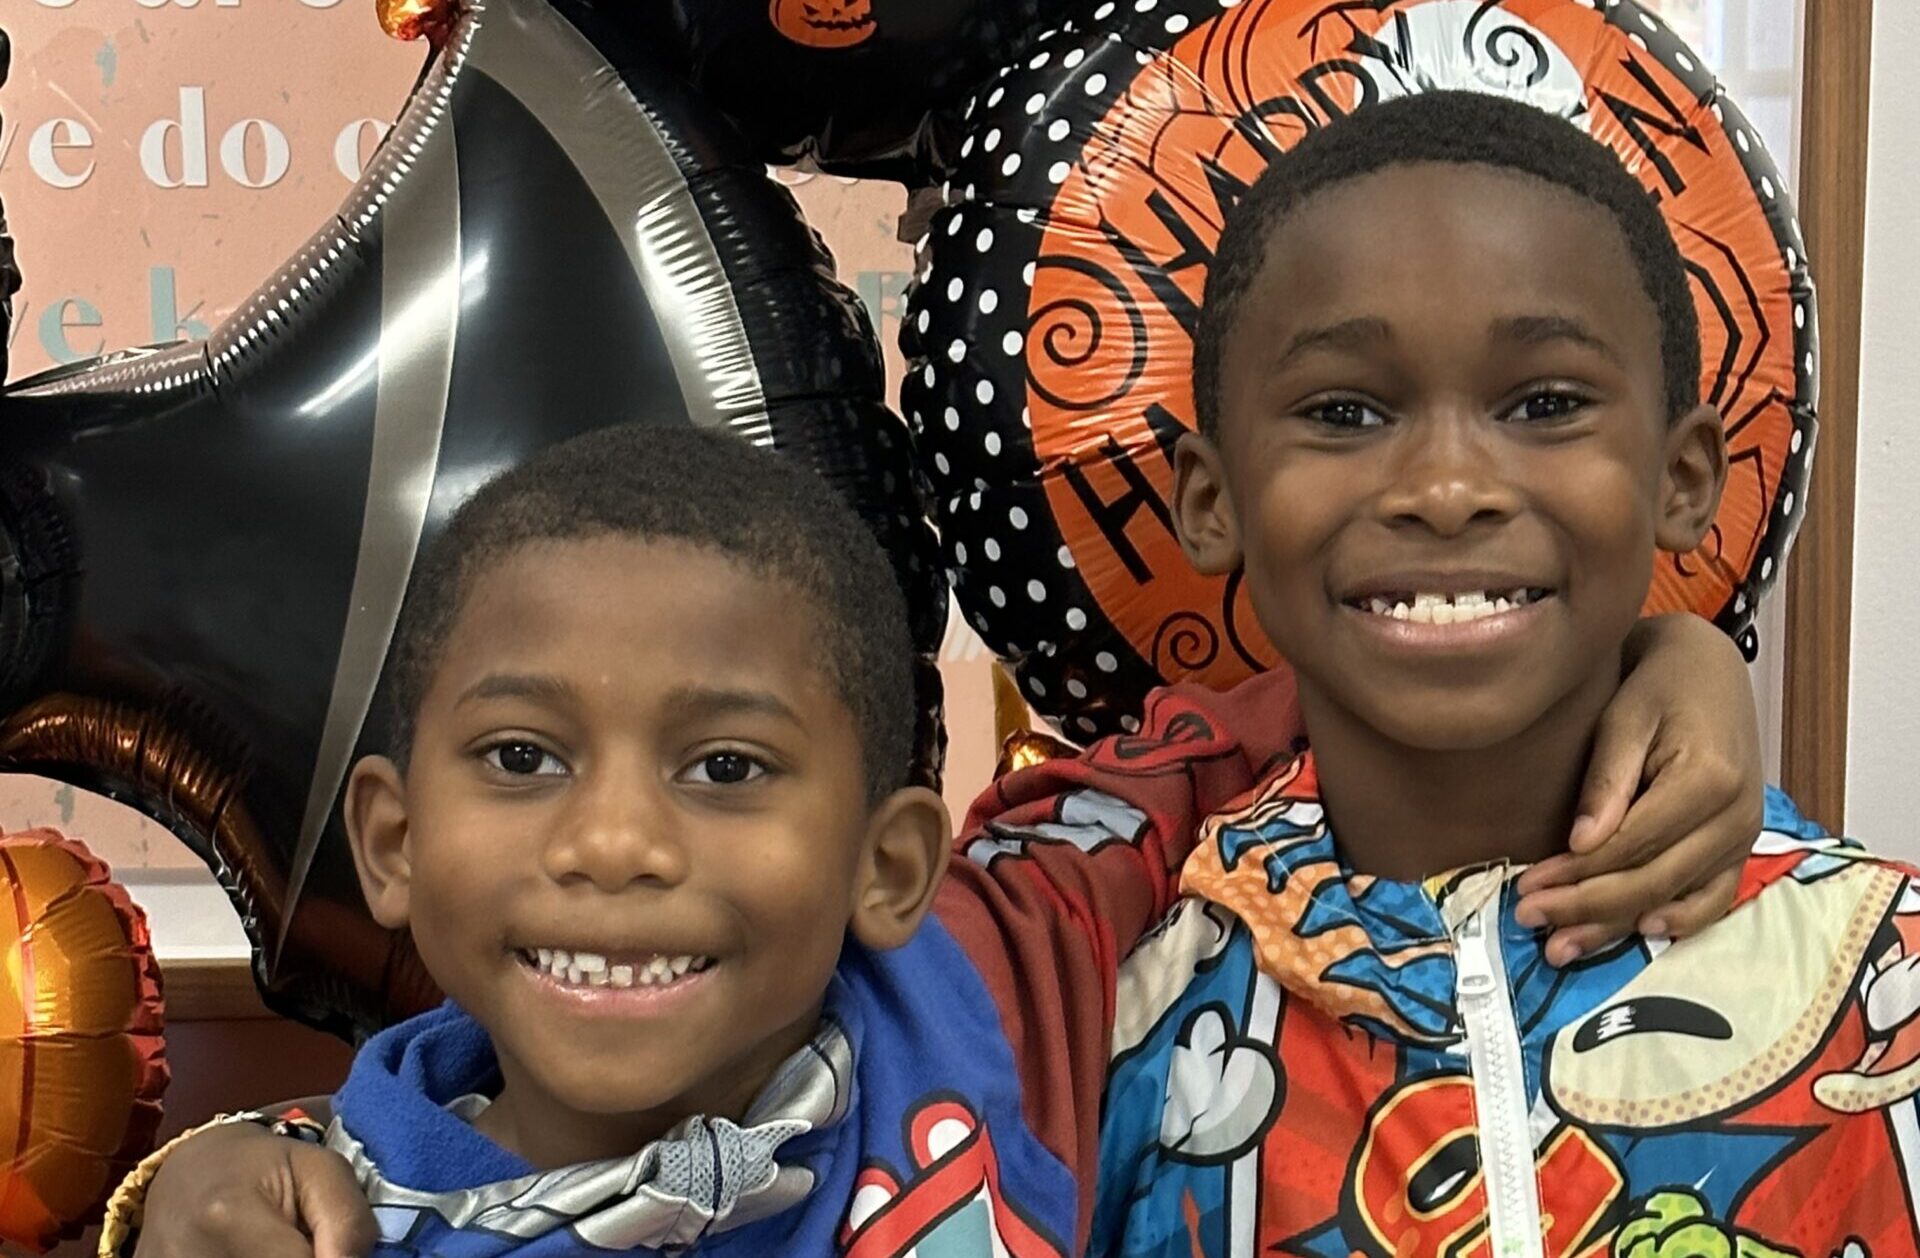 Two children dressed up for halloween smiling at the camera